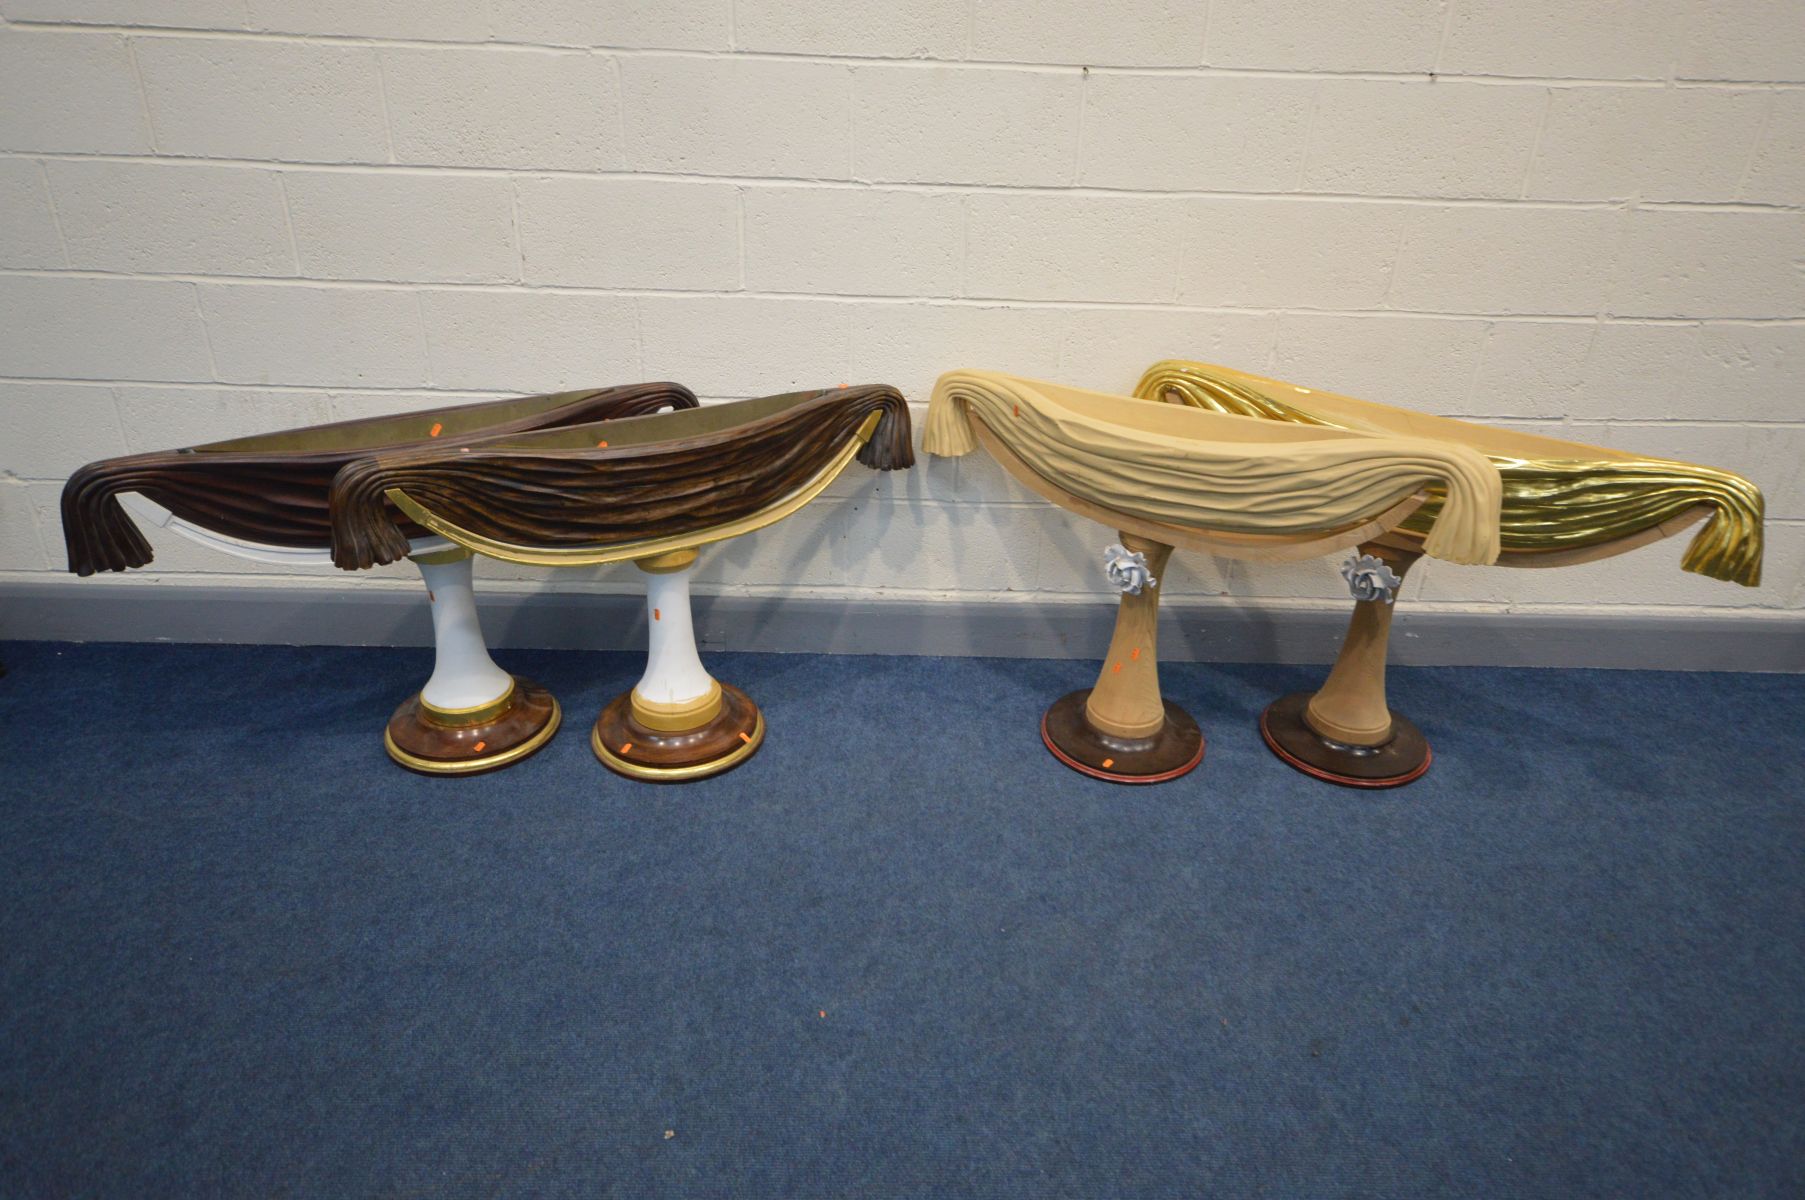 TWO PAIRS OF BESPOKE HAND CARVED PLANTERS, decorated as draped fabrics, on a cylindrical support,